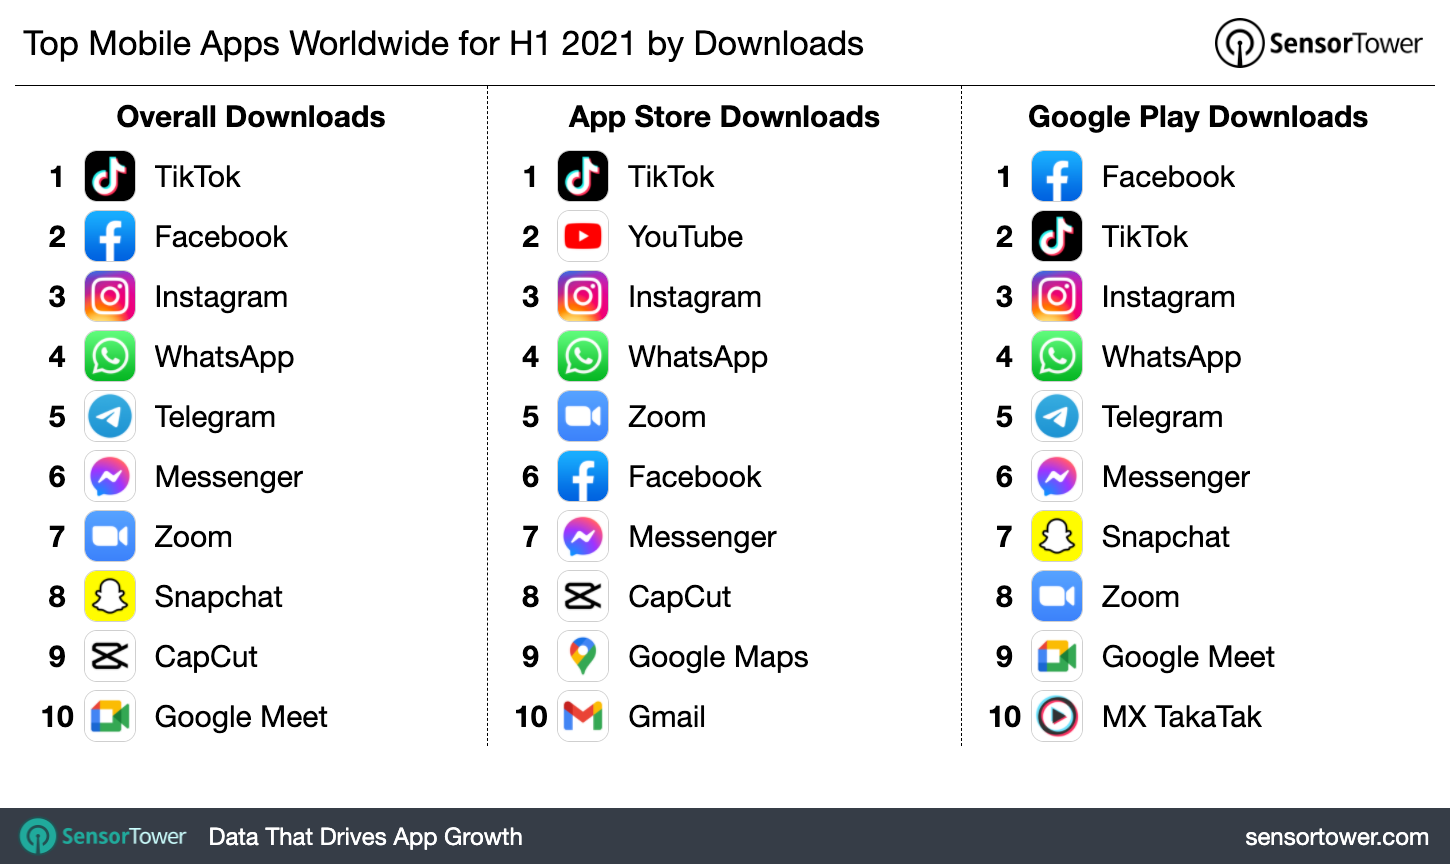 1H 2021 Most Downloaded Apps Worldwide